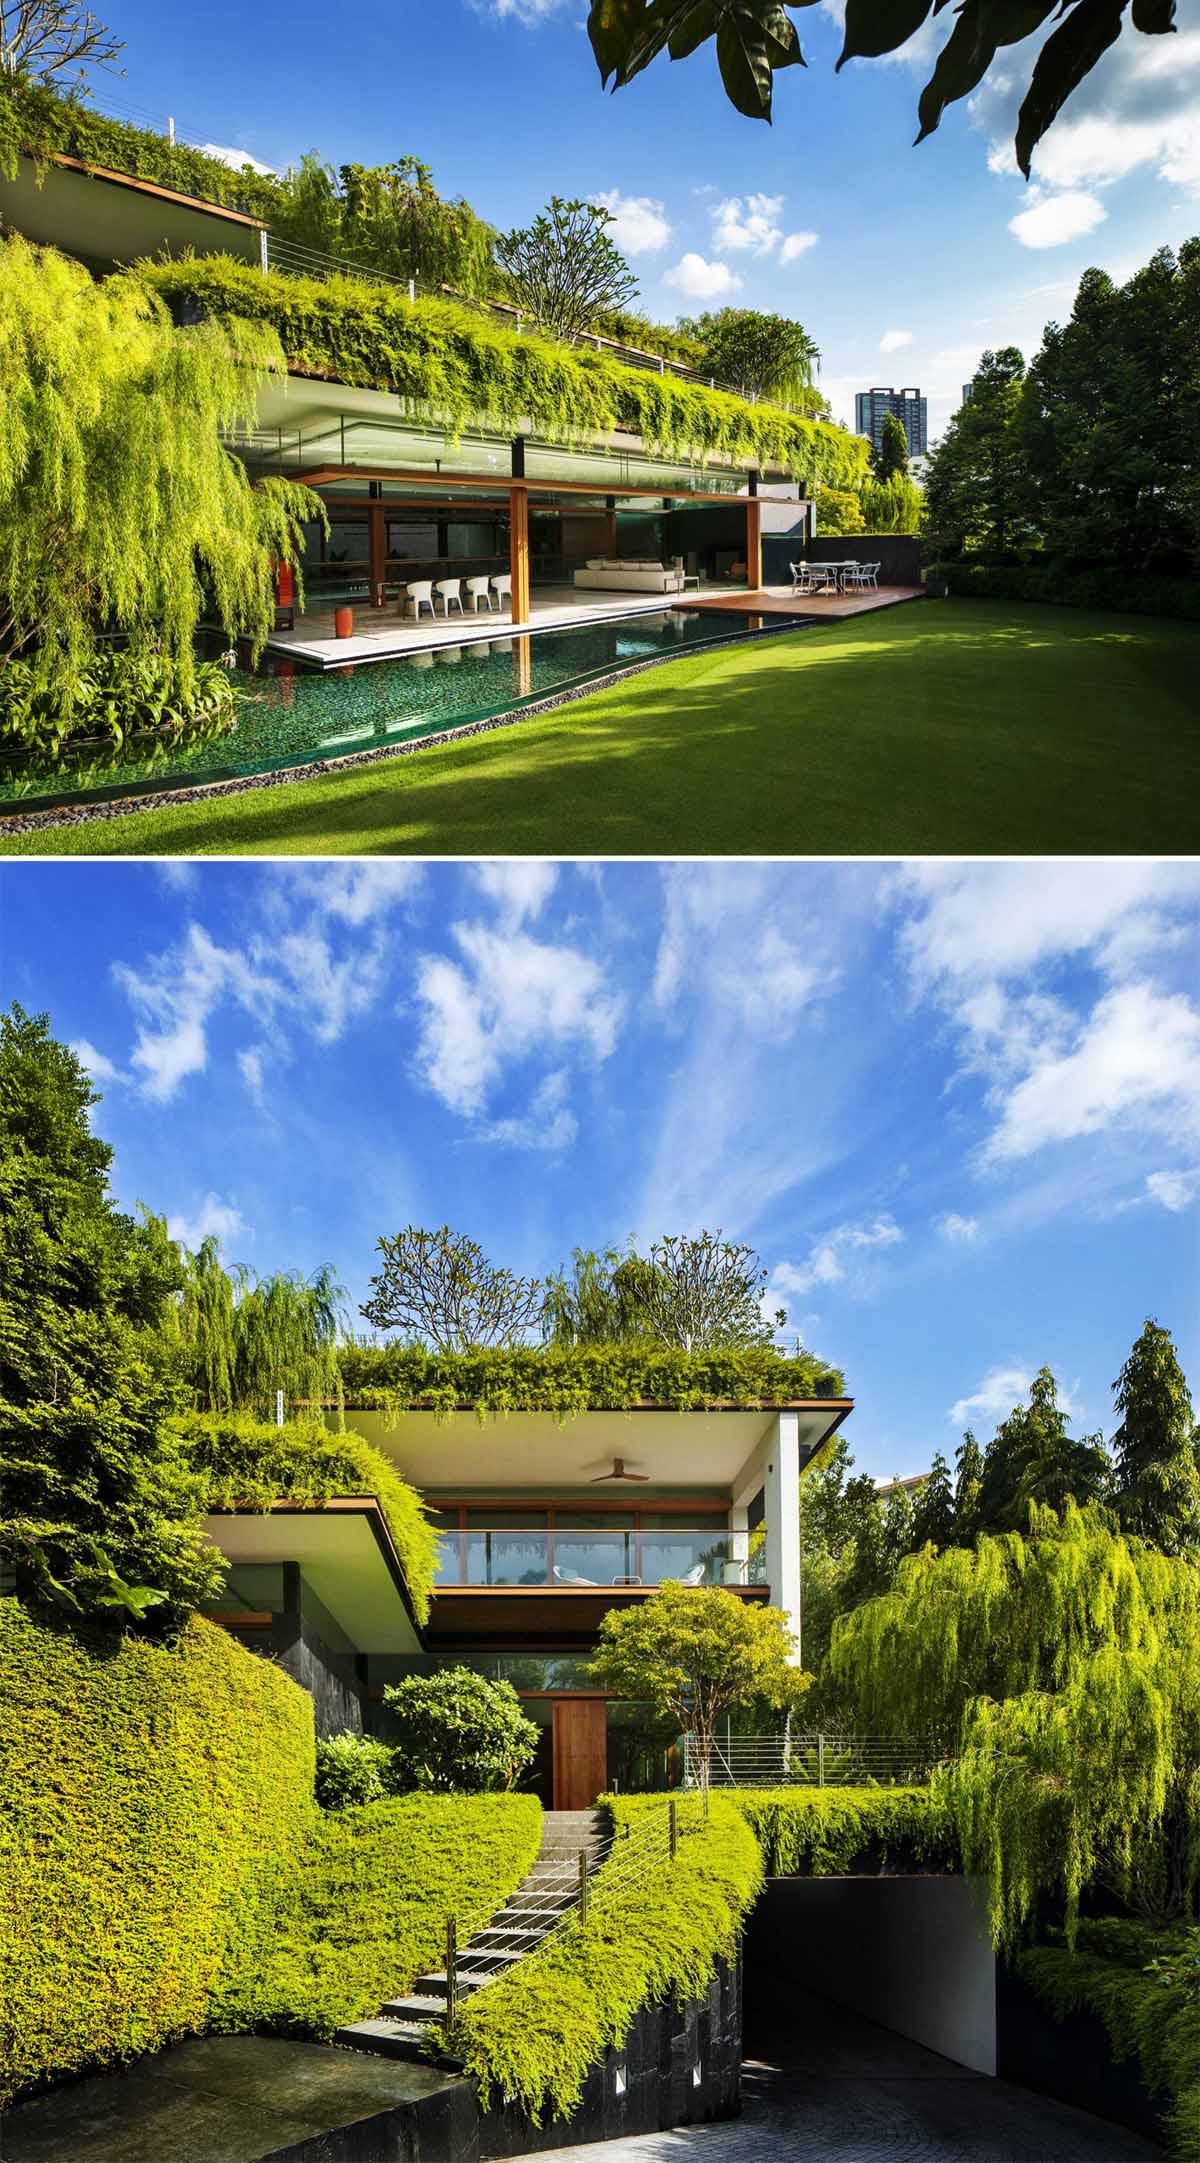 This house has rooftop gardens with plants that flow over the edges.